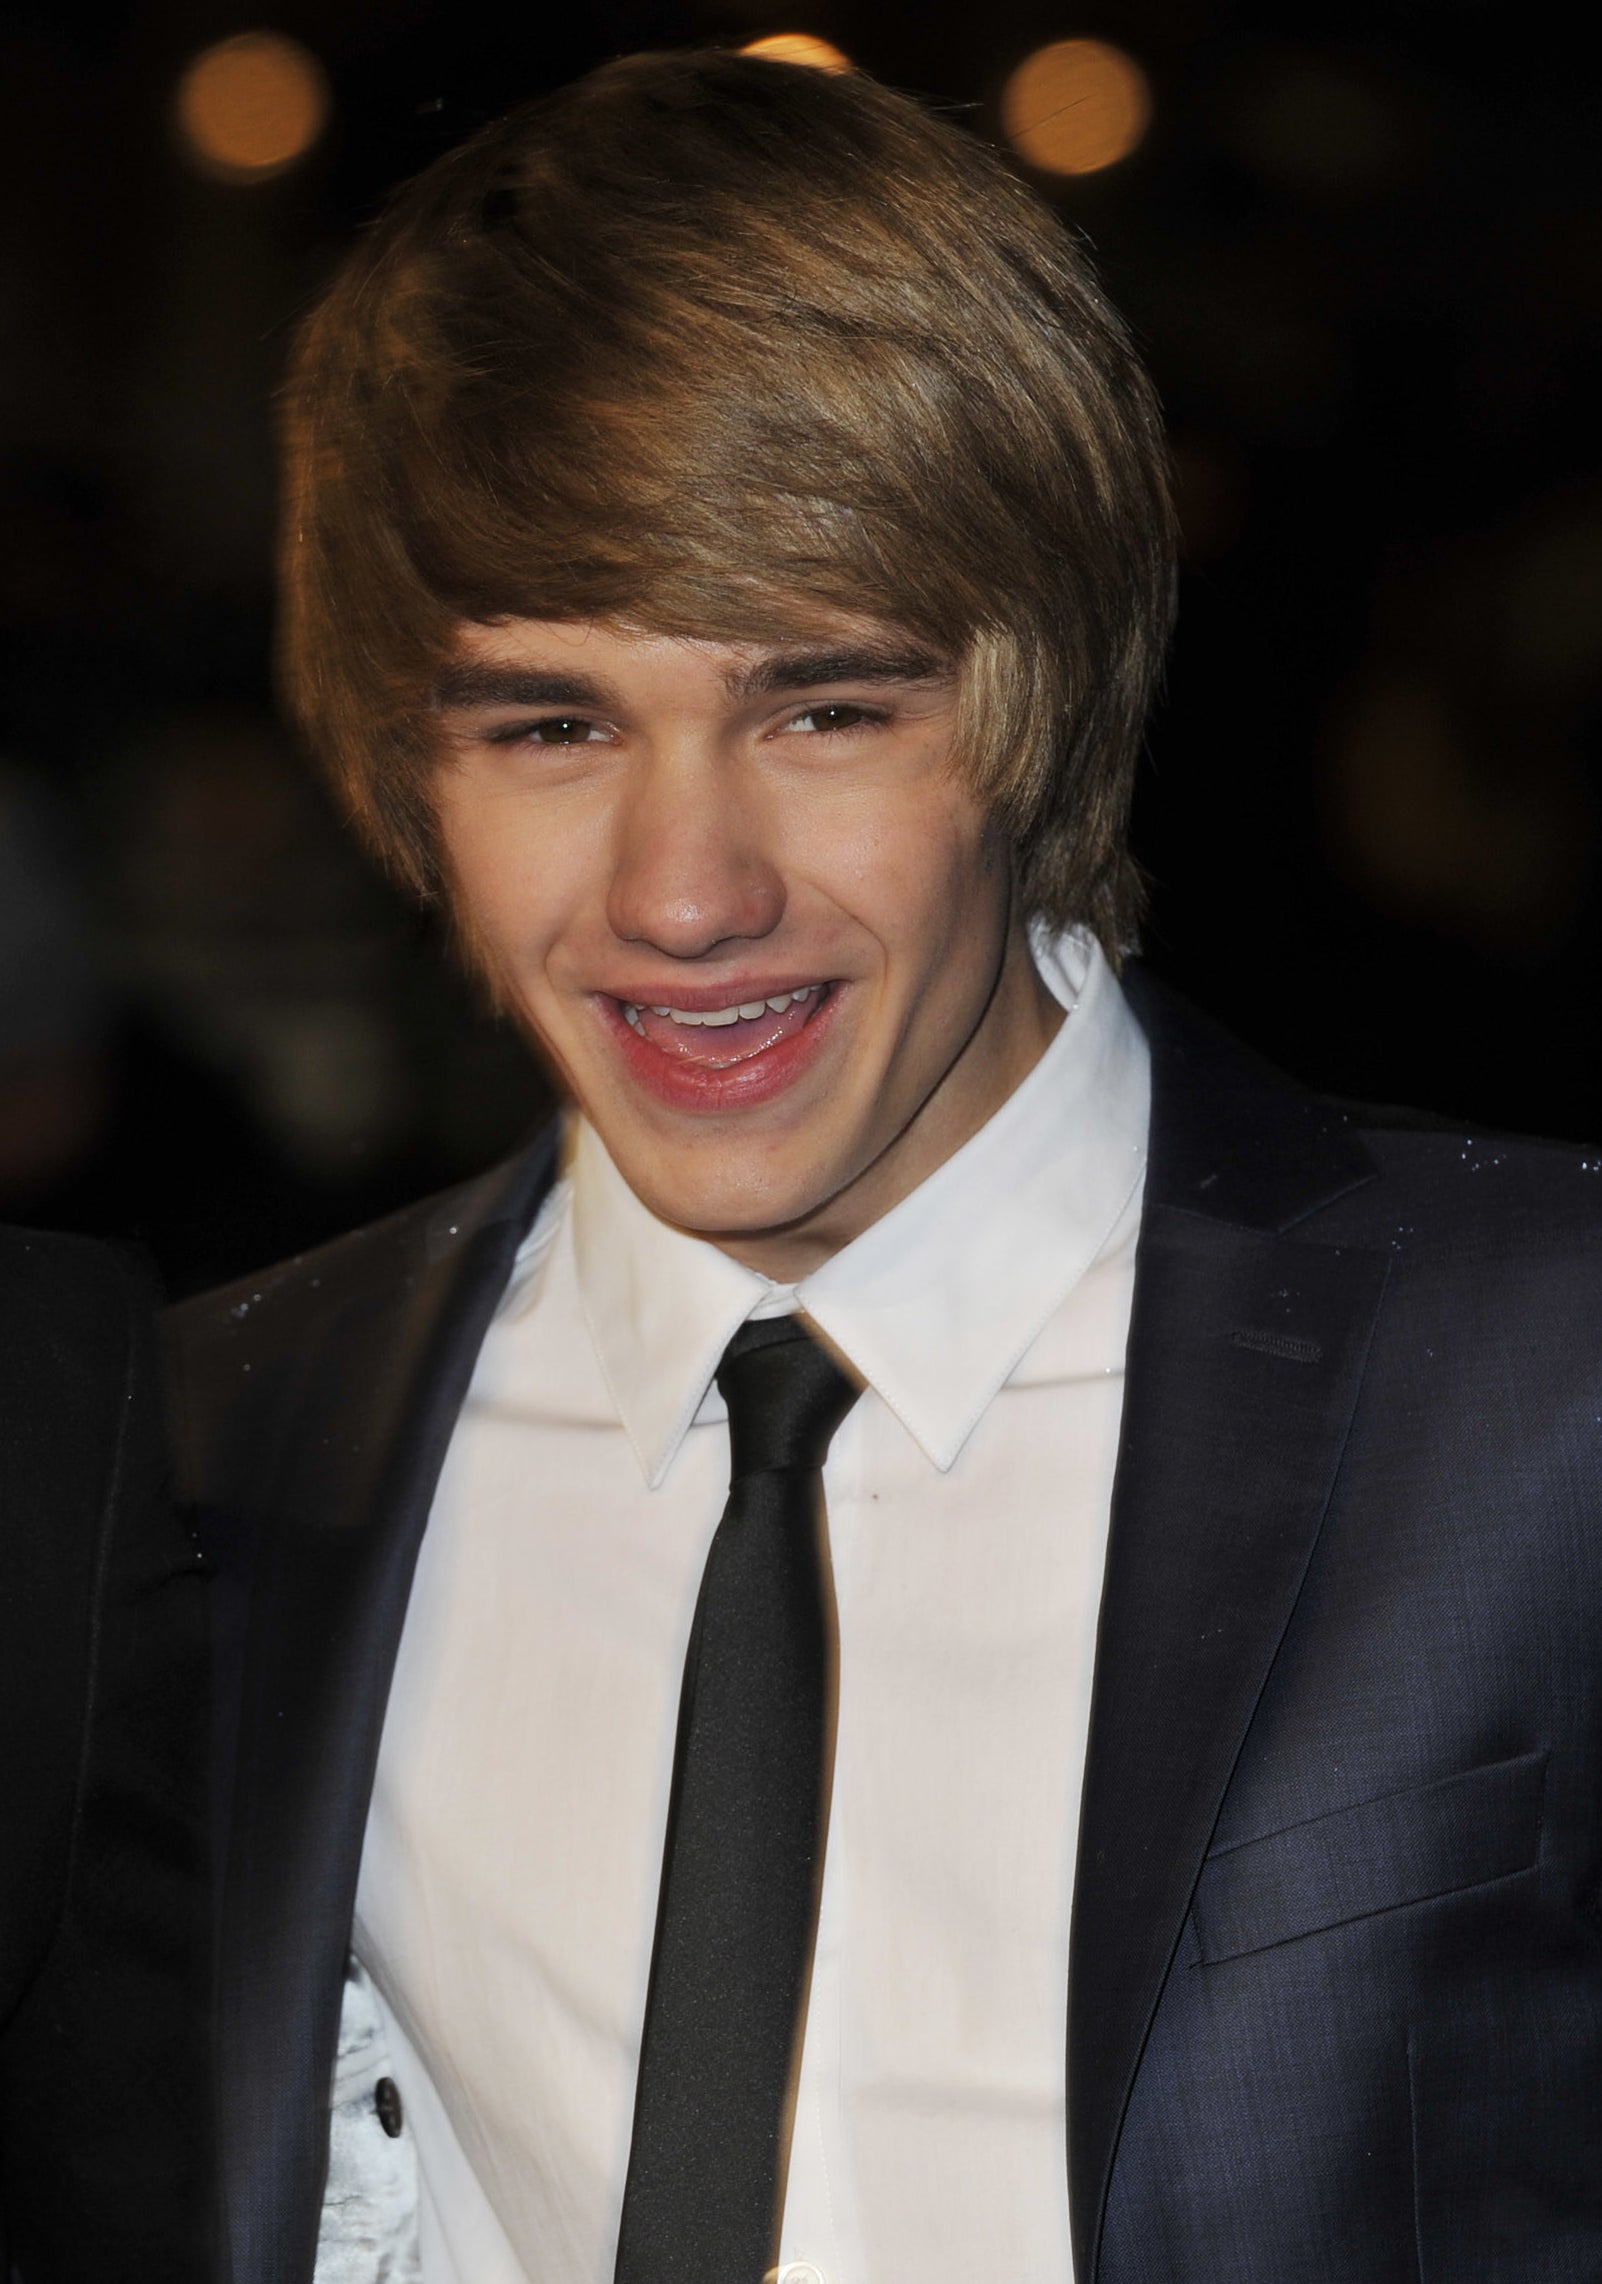 Liam Payne attending a movie premiere in 2010